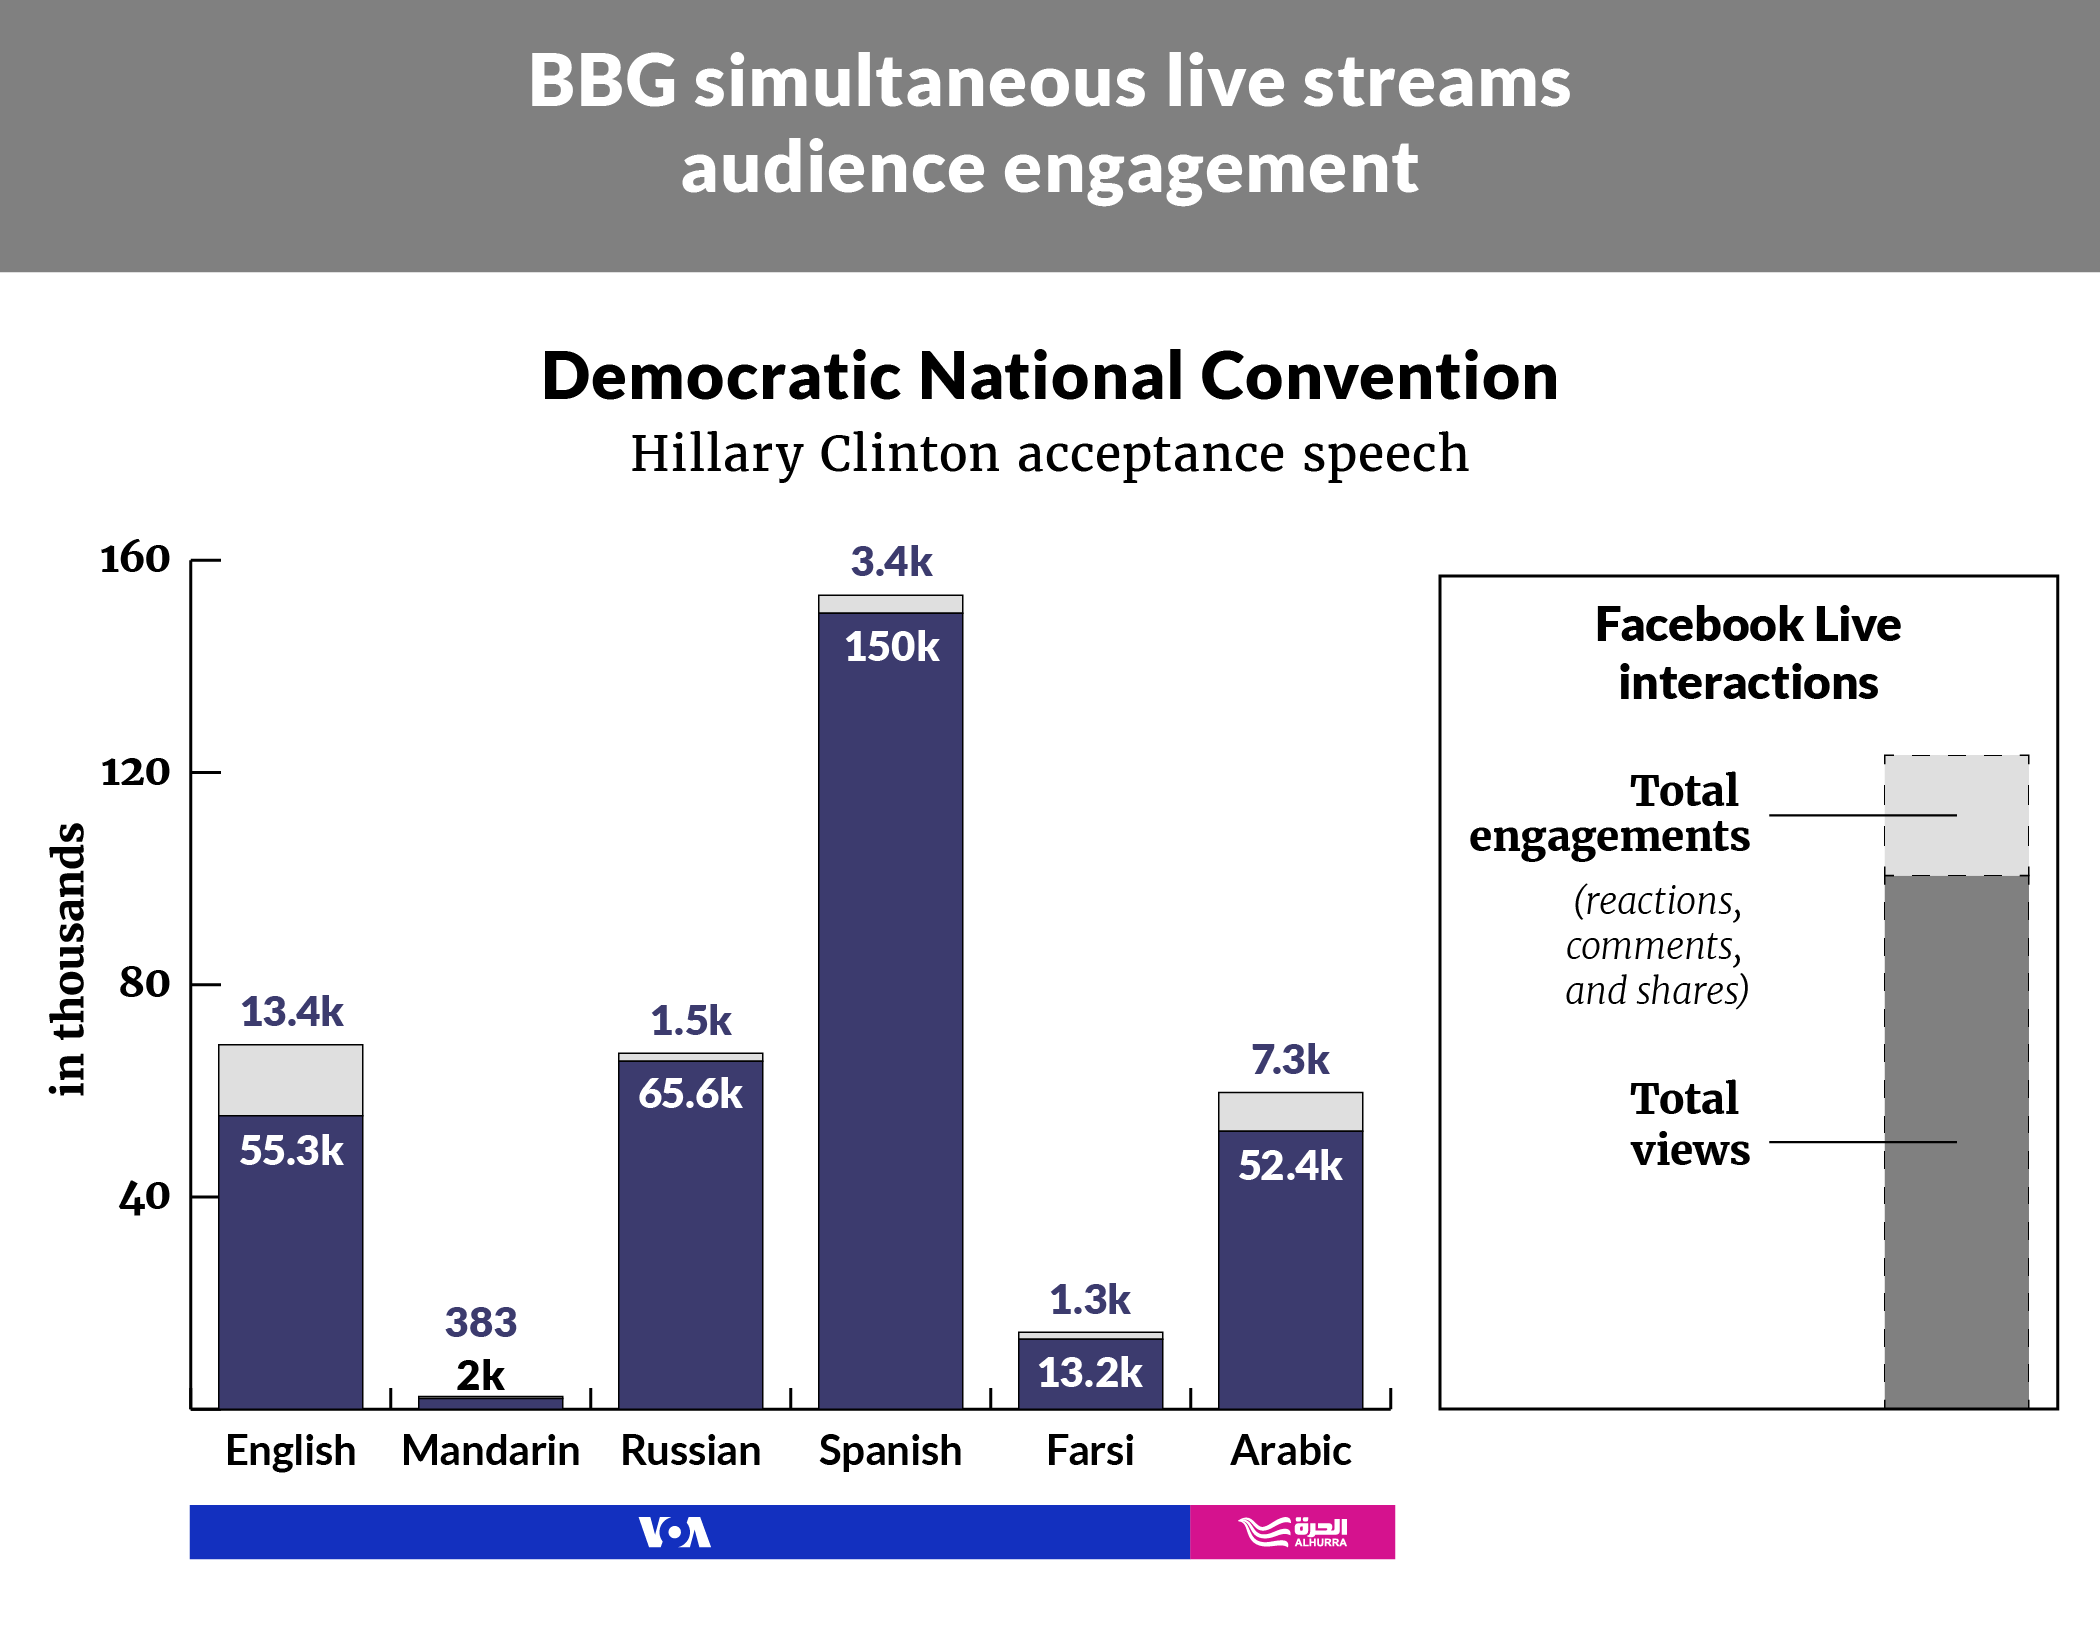 Stacked bar chart showing the audience engagement of the Facebook Live stream of the Democratic National Convention acceptance speech